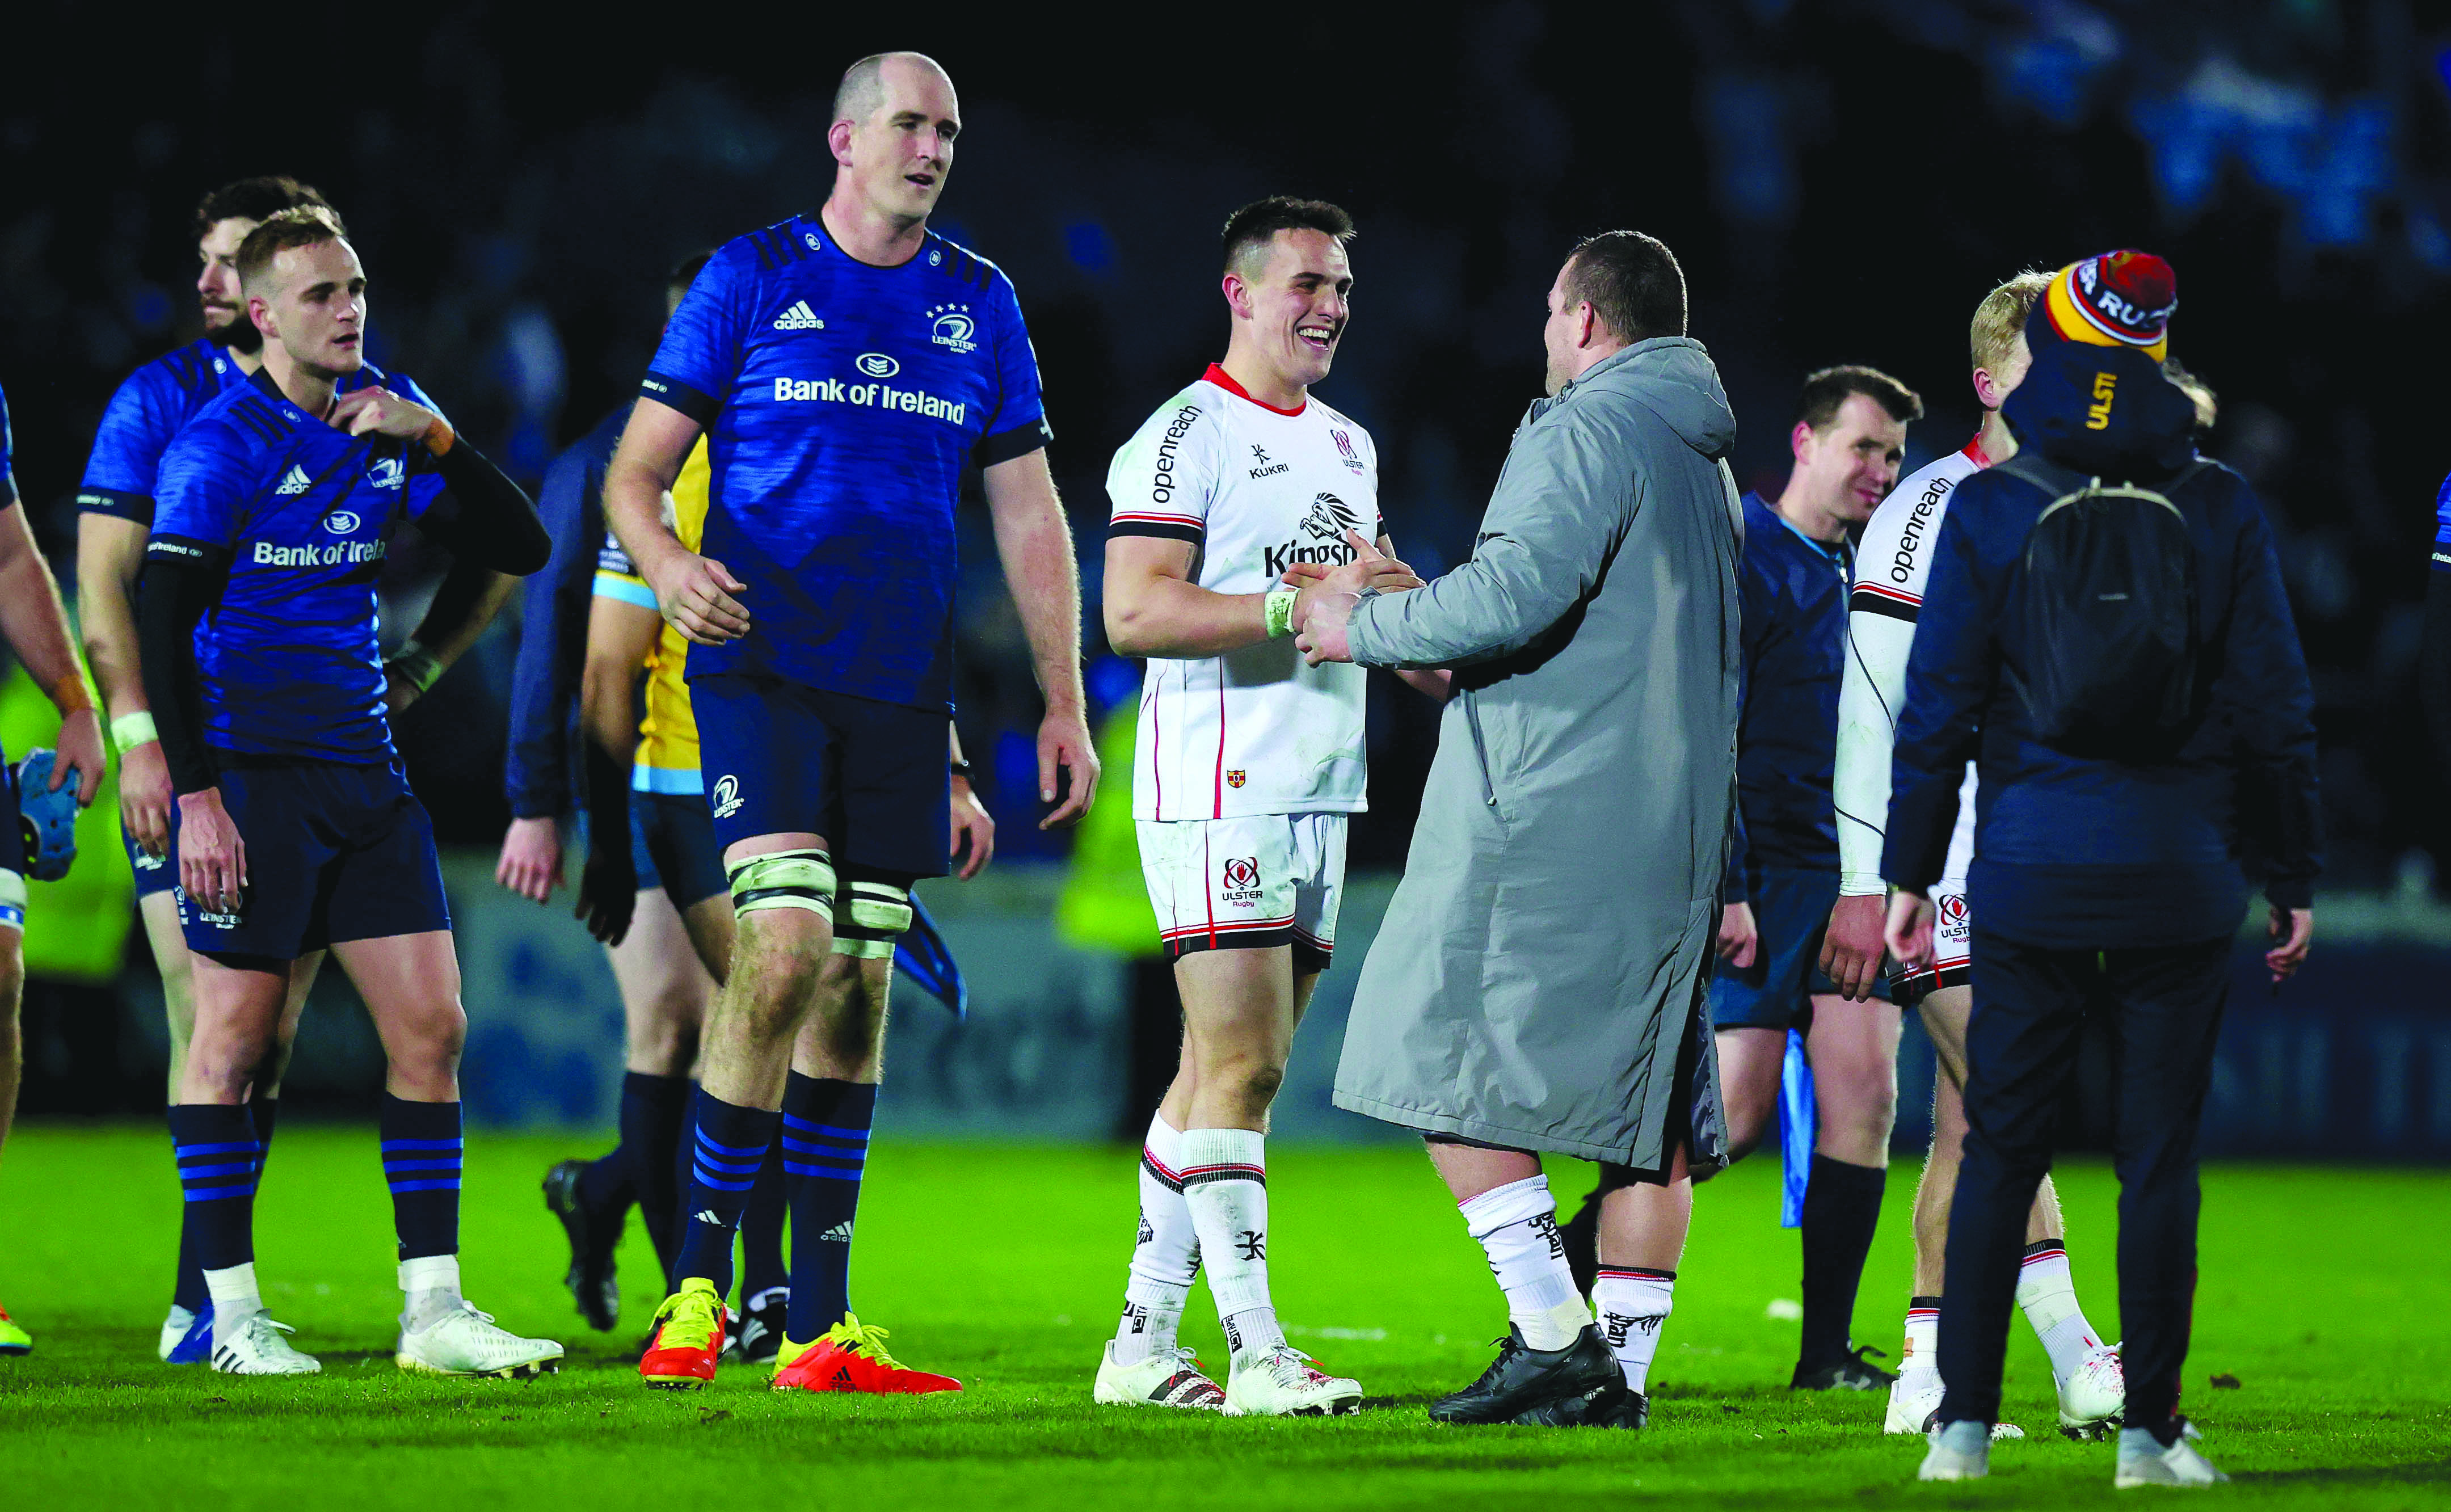 James Hume takes the congratulations as Devin Toner looks on after Ulster’s 20-10 win over Leinster at the RDS last week